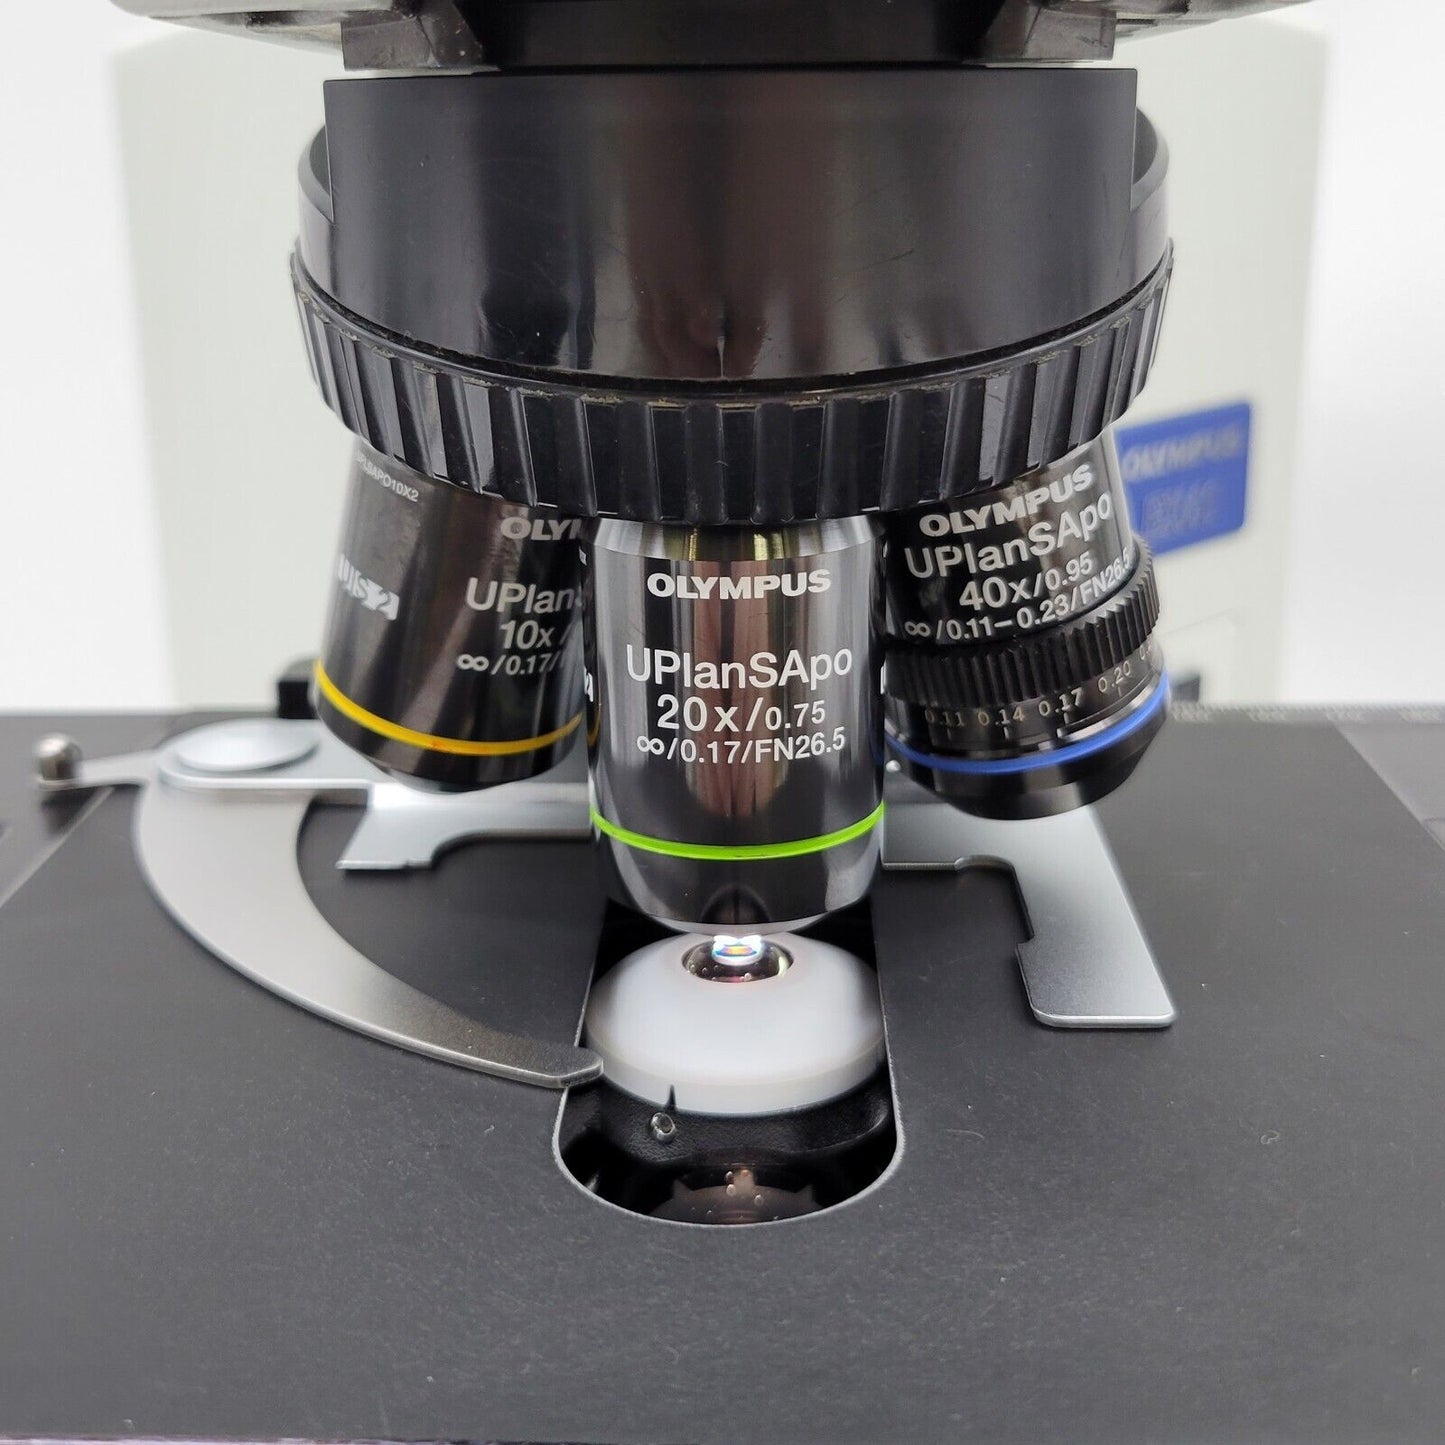 Olympus Microscope BX41 with Apos and Tilting Head Pathology / Mohs - microscopemarketplace